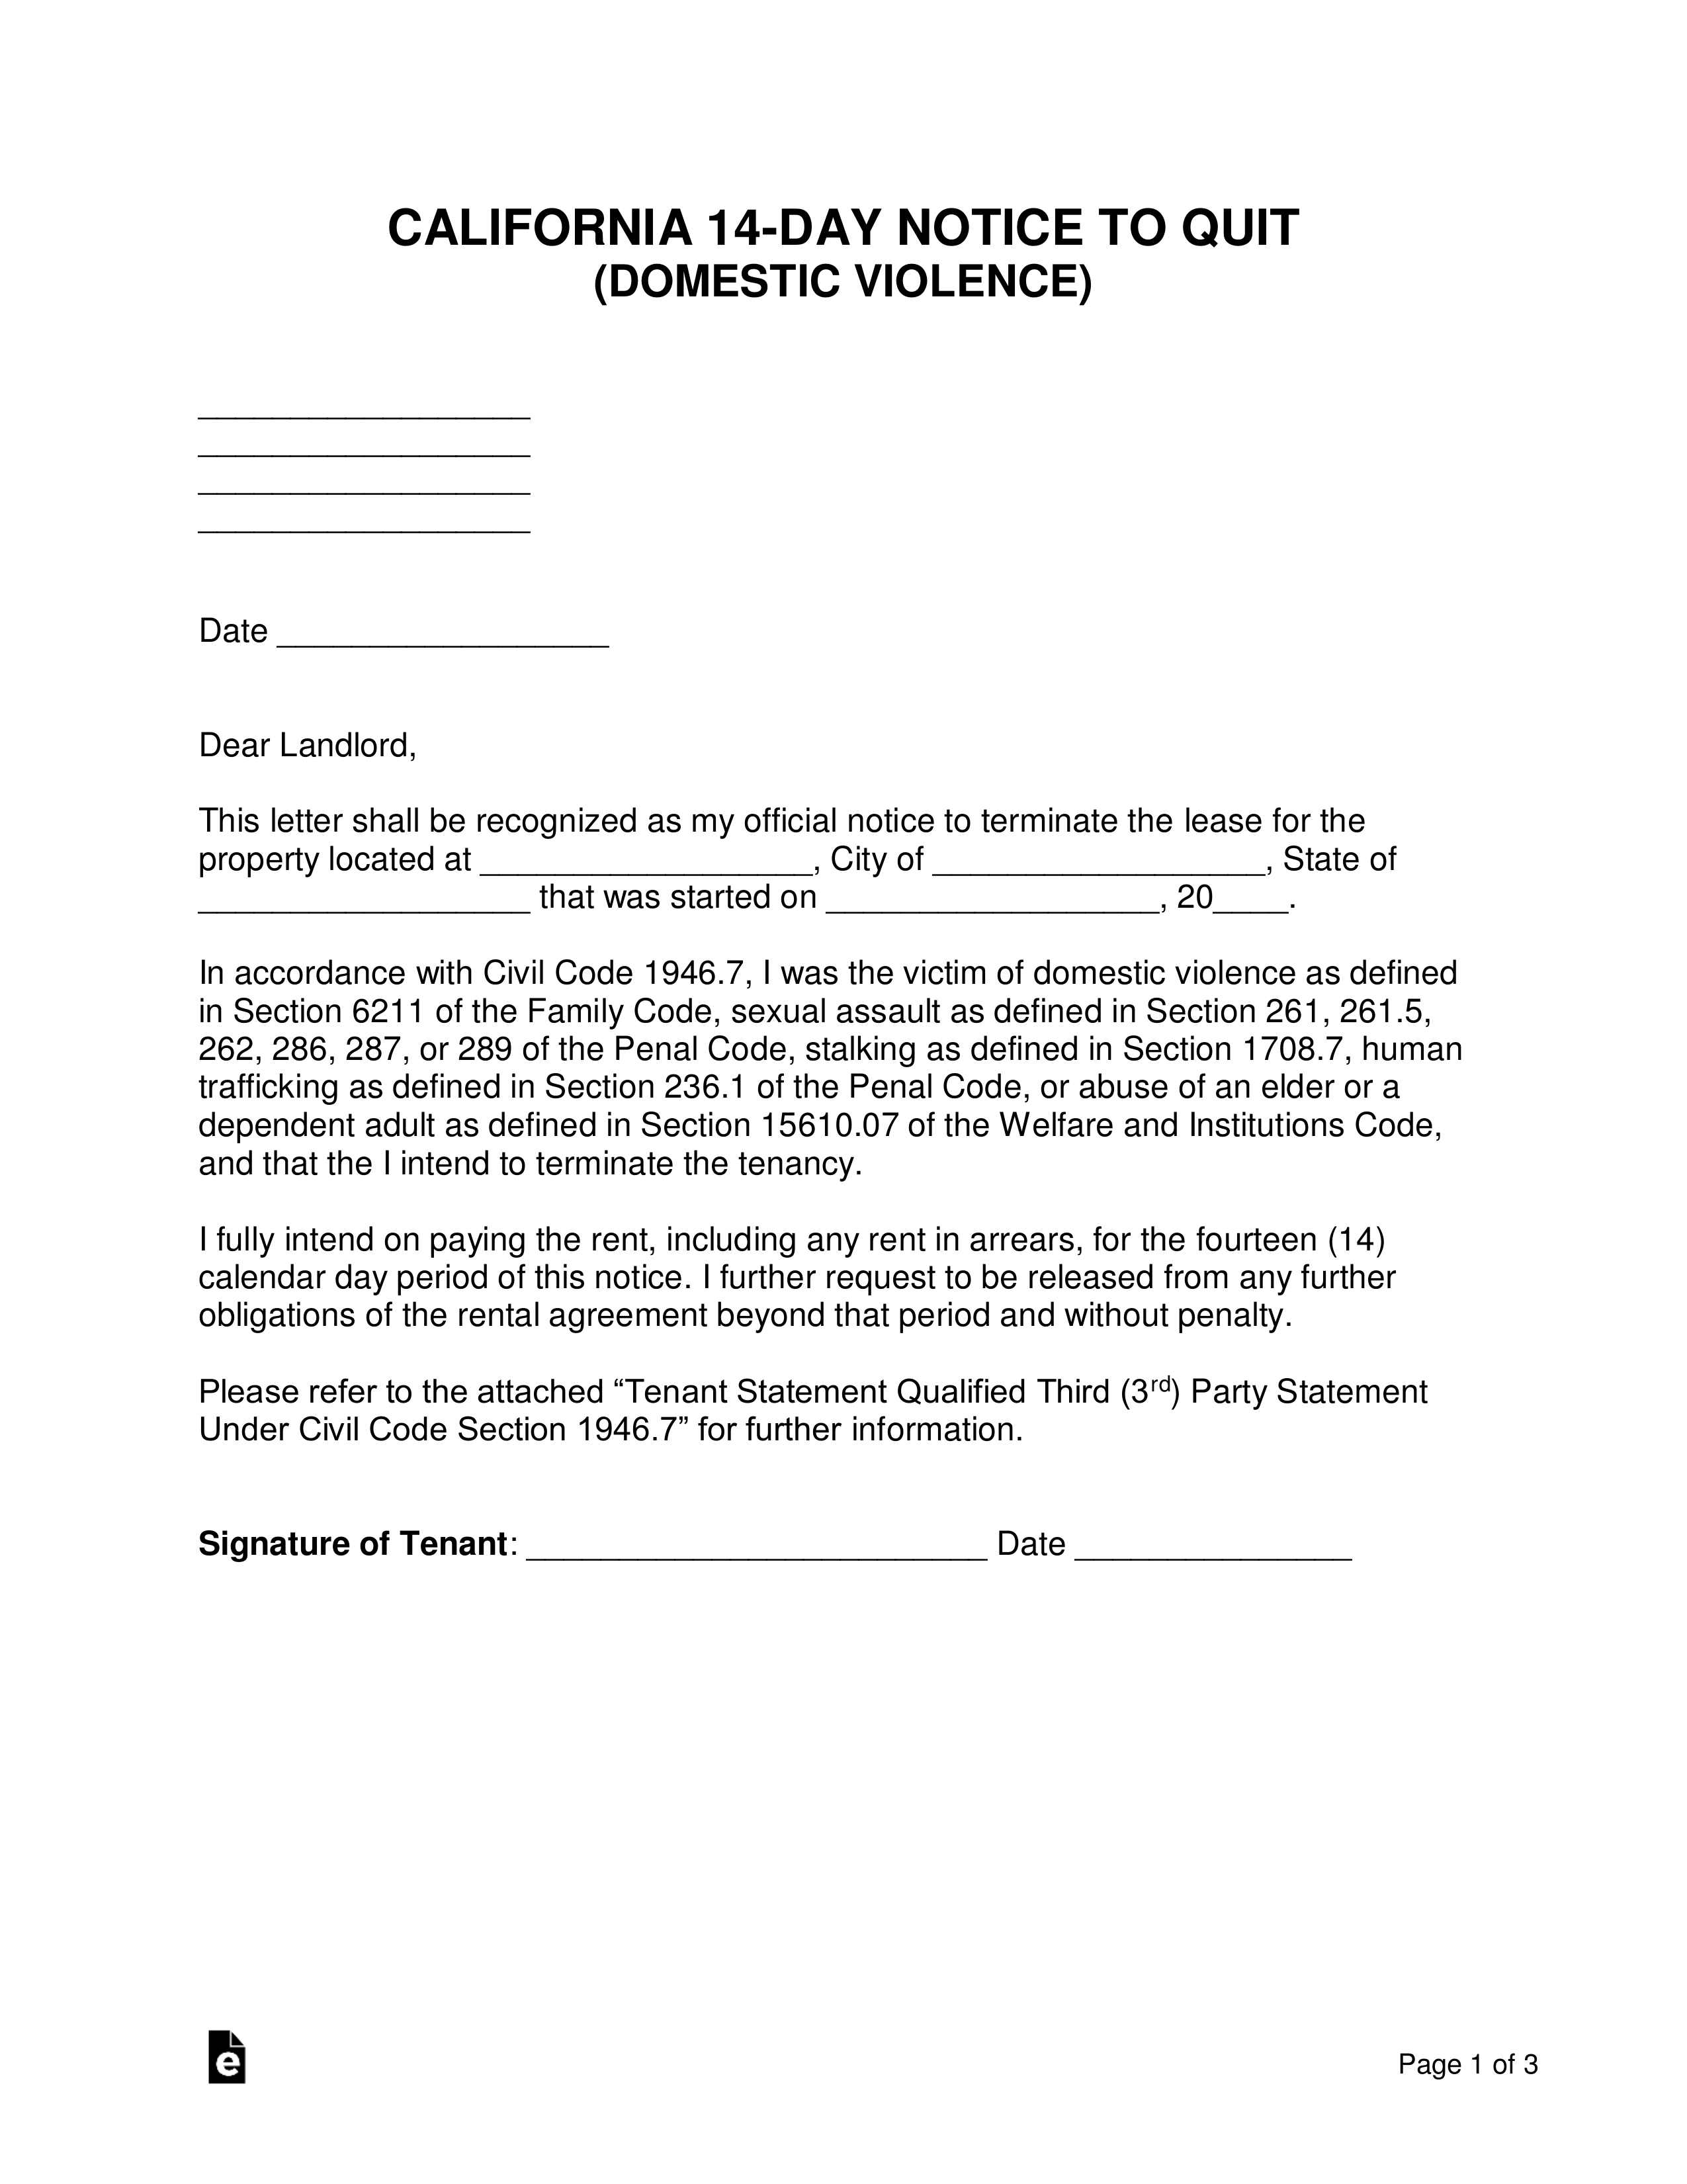 California 14-Day Notice to Quit (Domestic Violence)